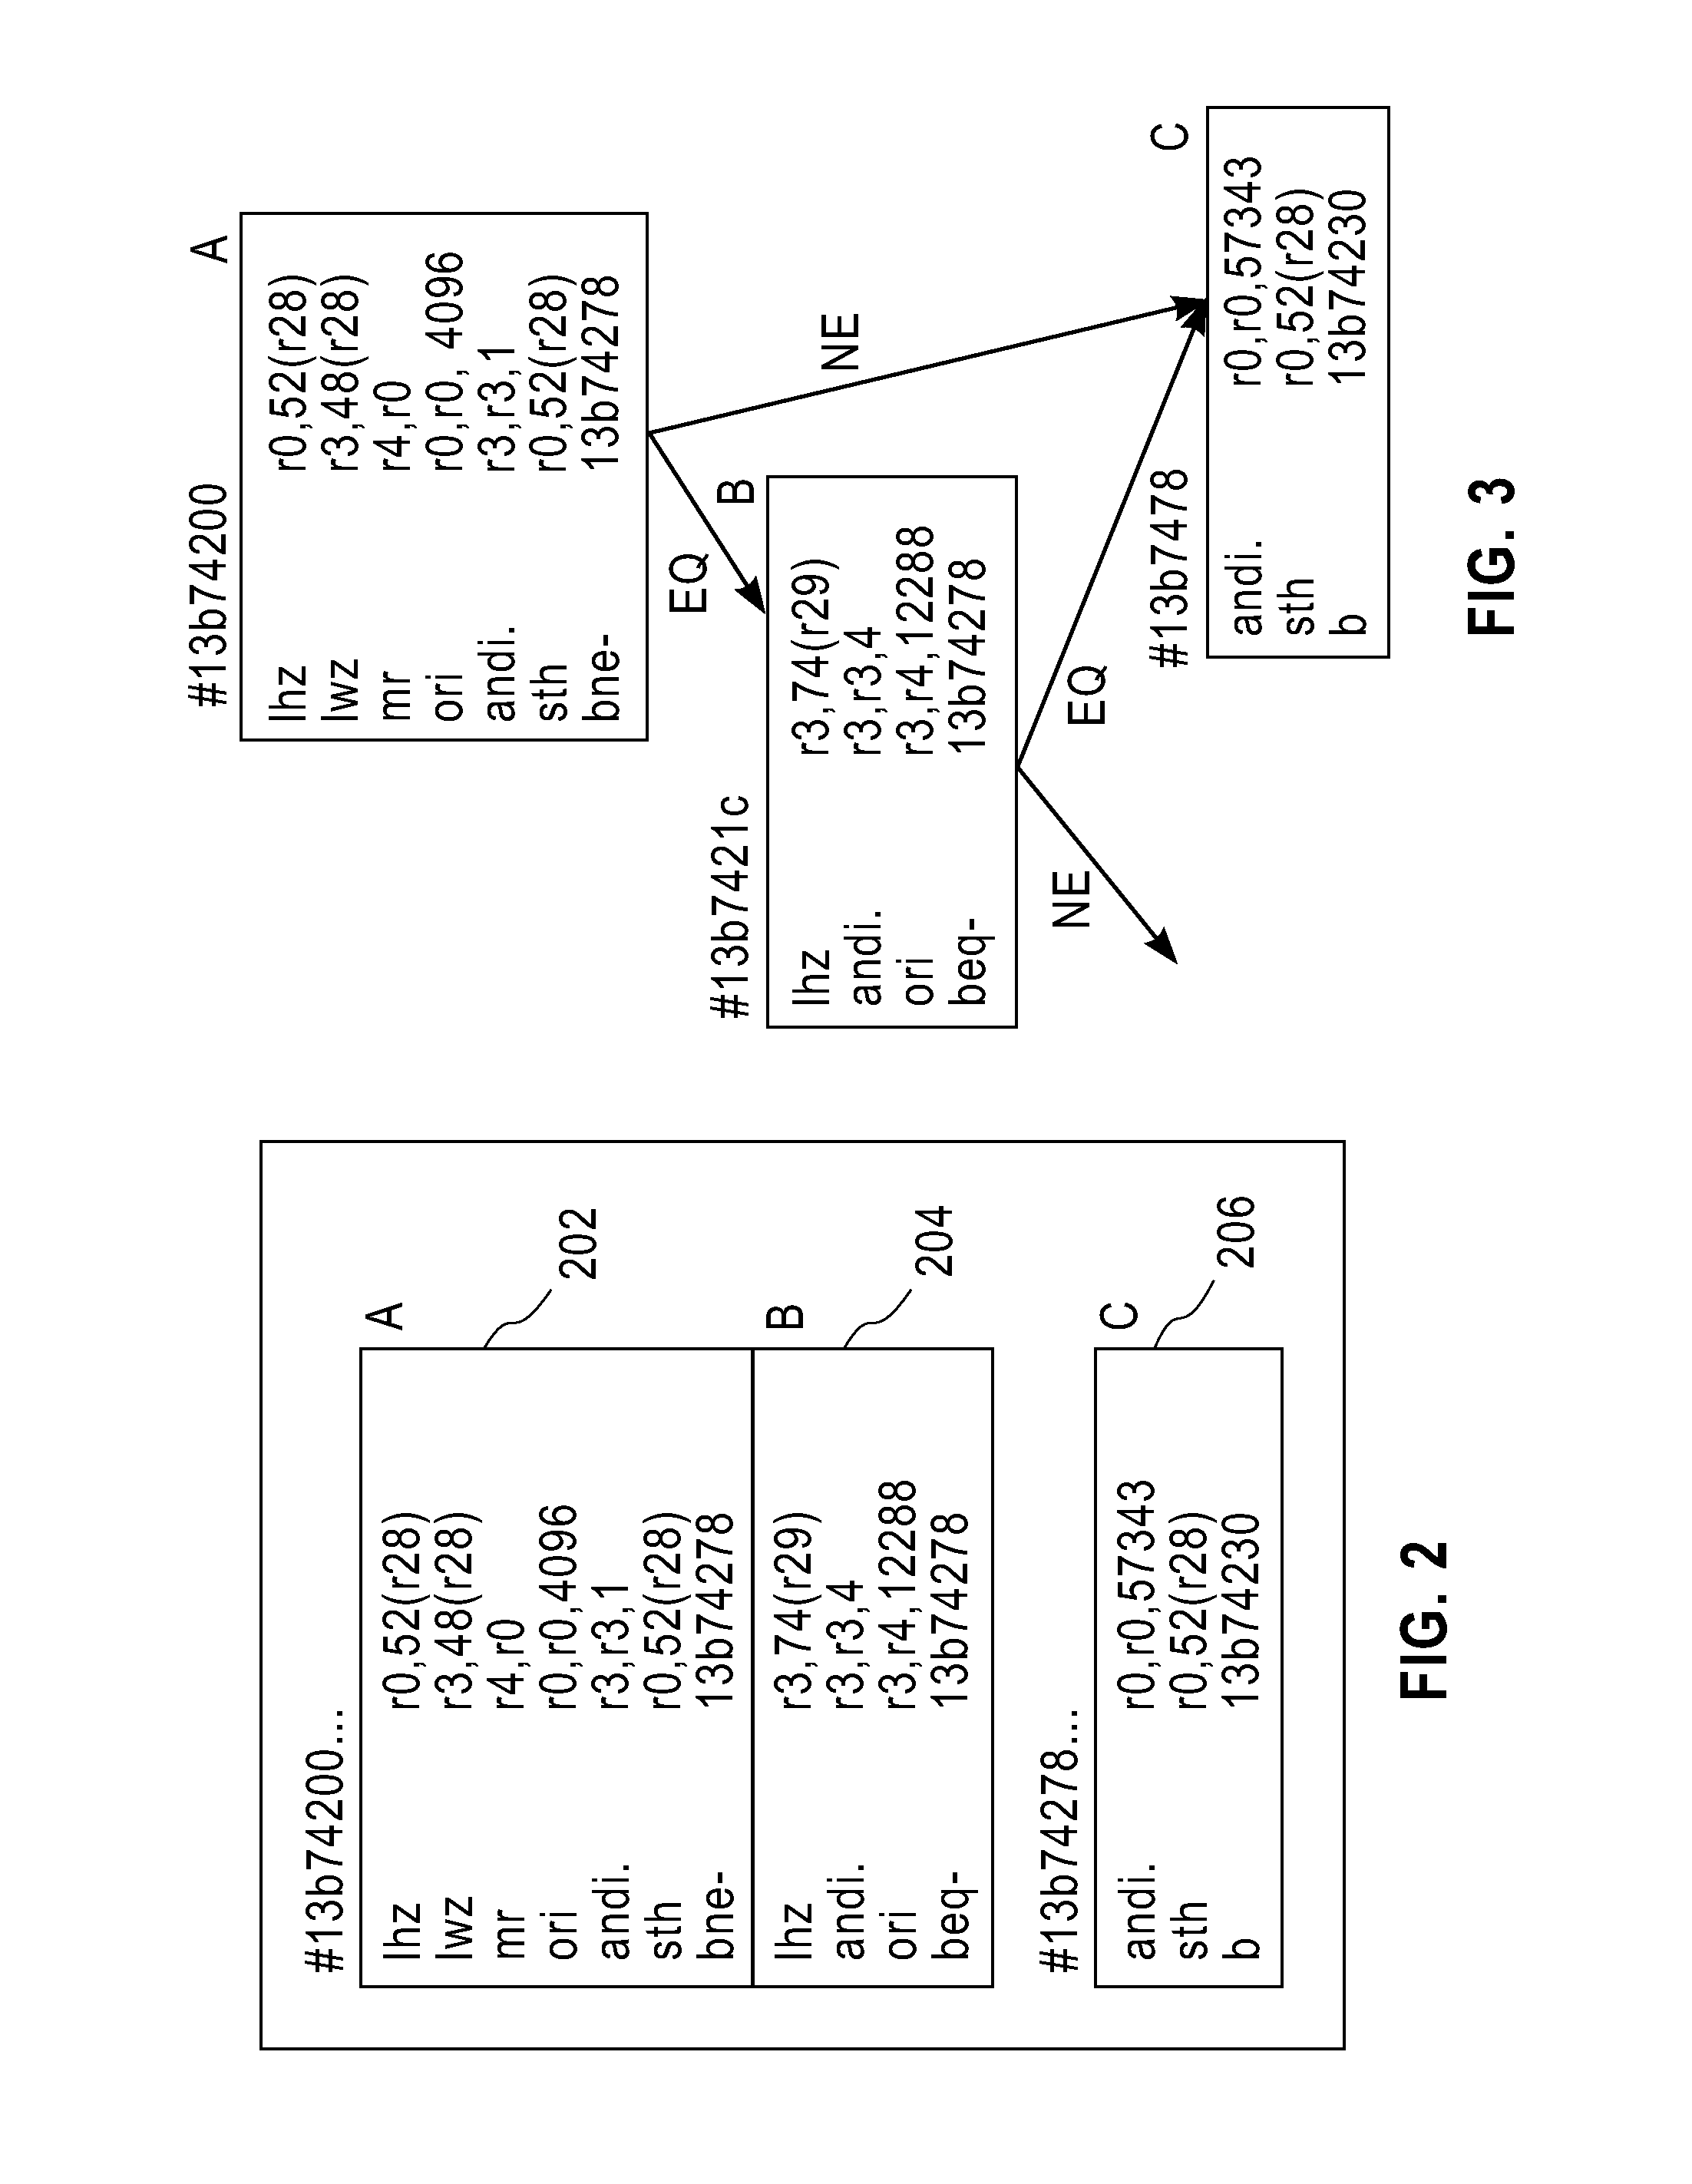 Method for validation of binary code transformations